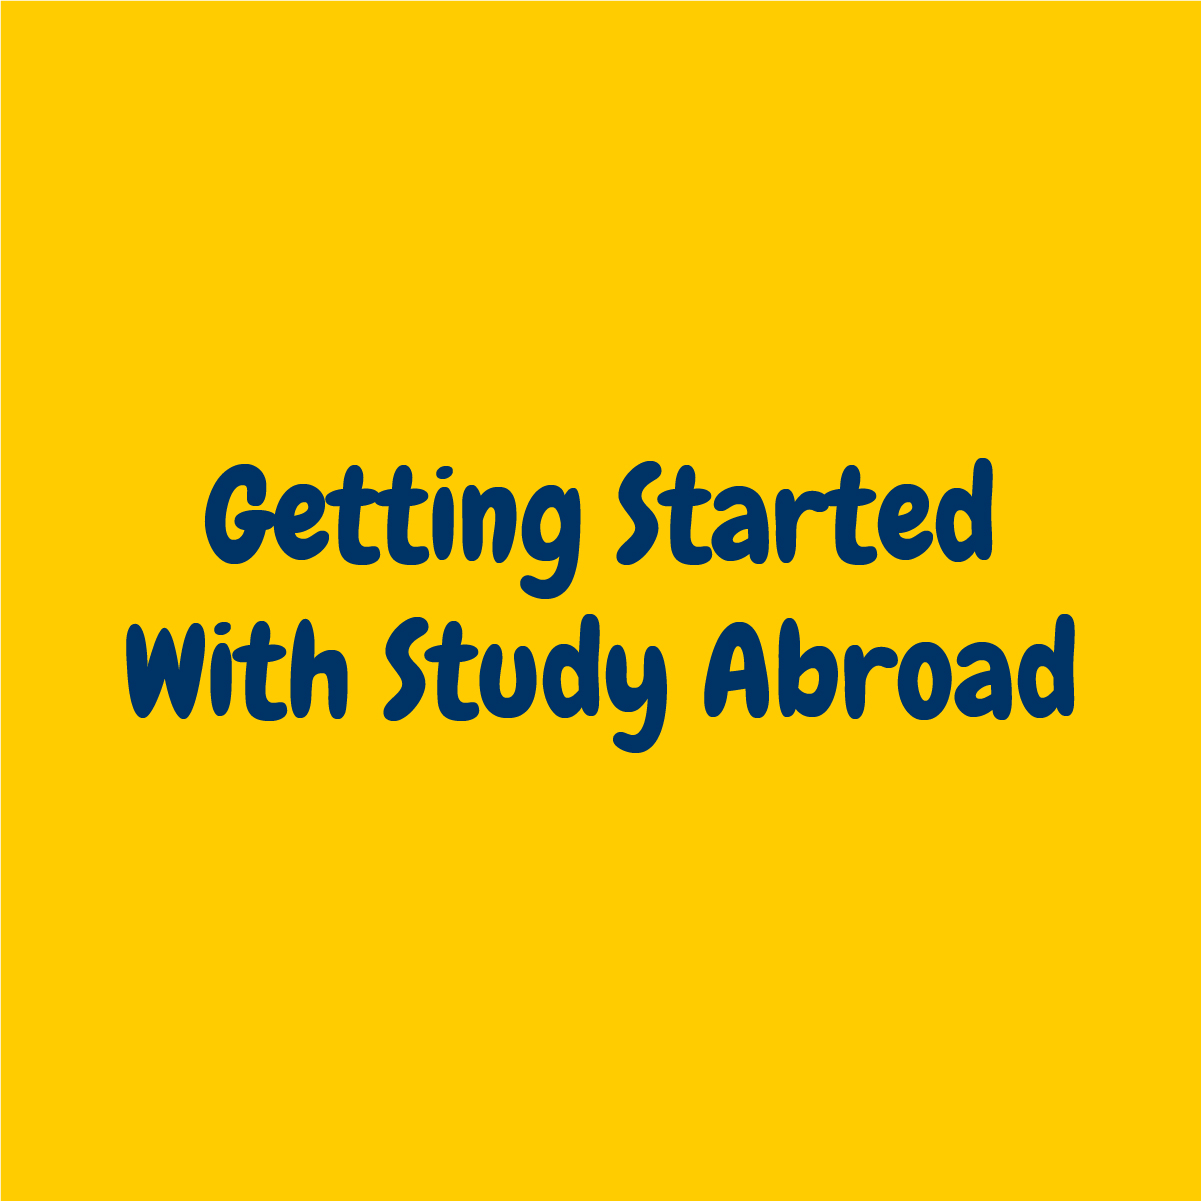 Getting Started with Study Abroad